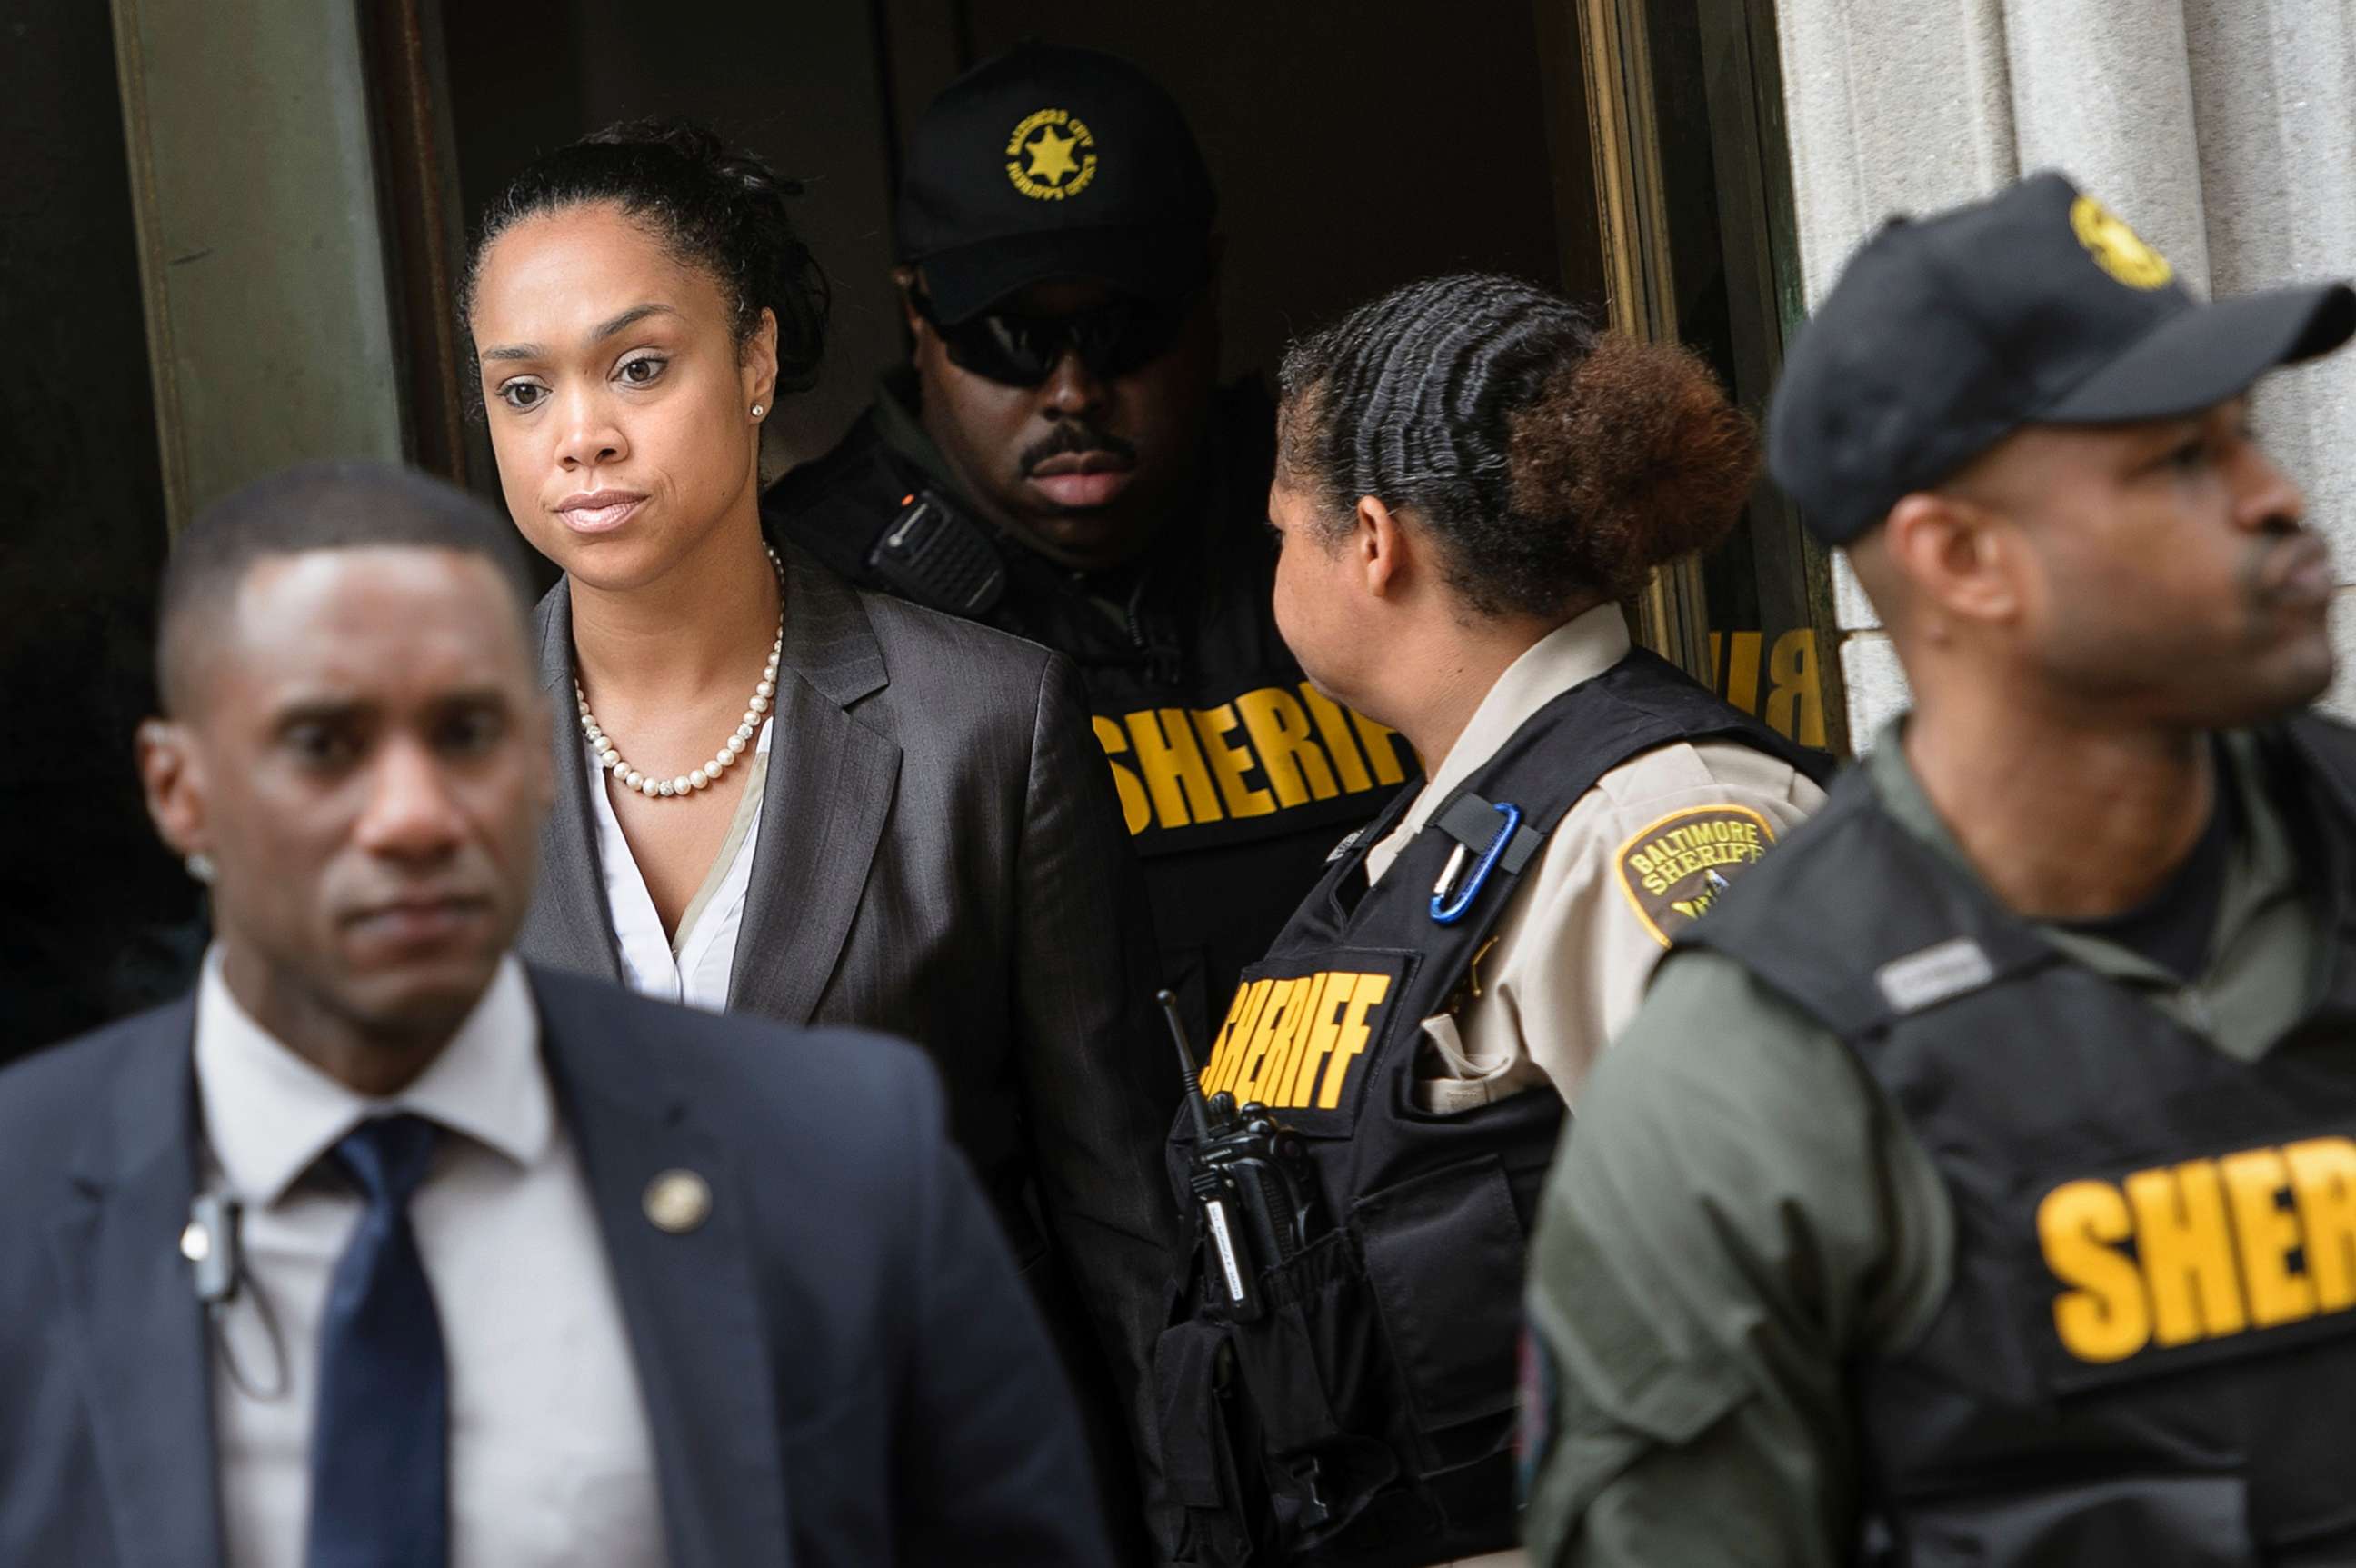 PHOTO: Baltimore City State's Attorney Marilyn Mosby leaves after Baltimore Officer Caesar Goodson Jr. was acquitted of all charges in his murder trial for the death of Freddie Gray, at the Mitchell Court House, June 23, 2016 in Baltimore, Md.